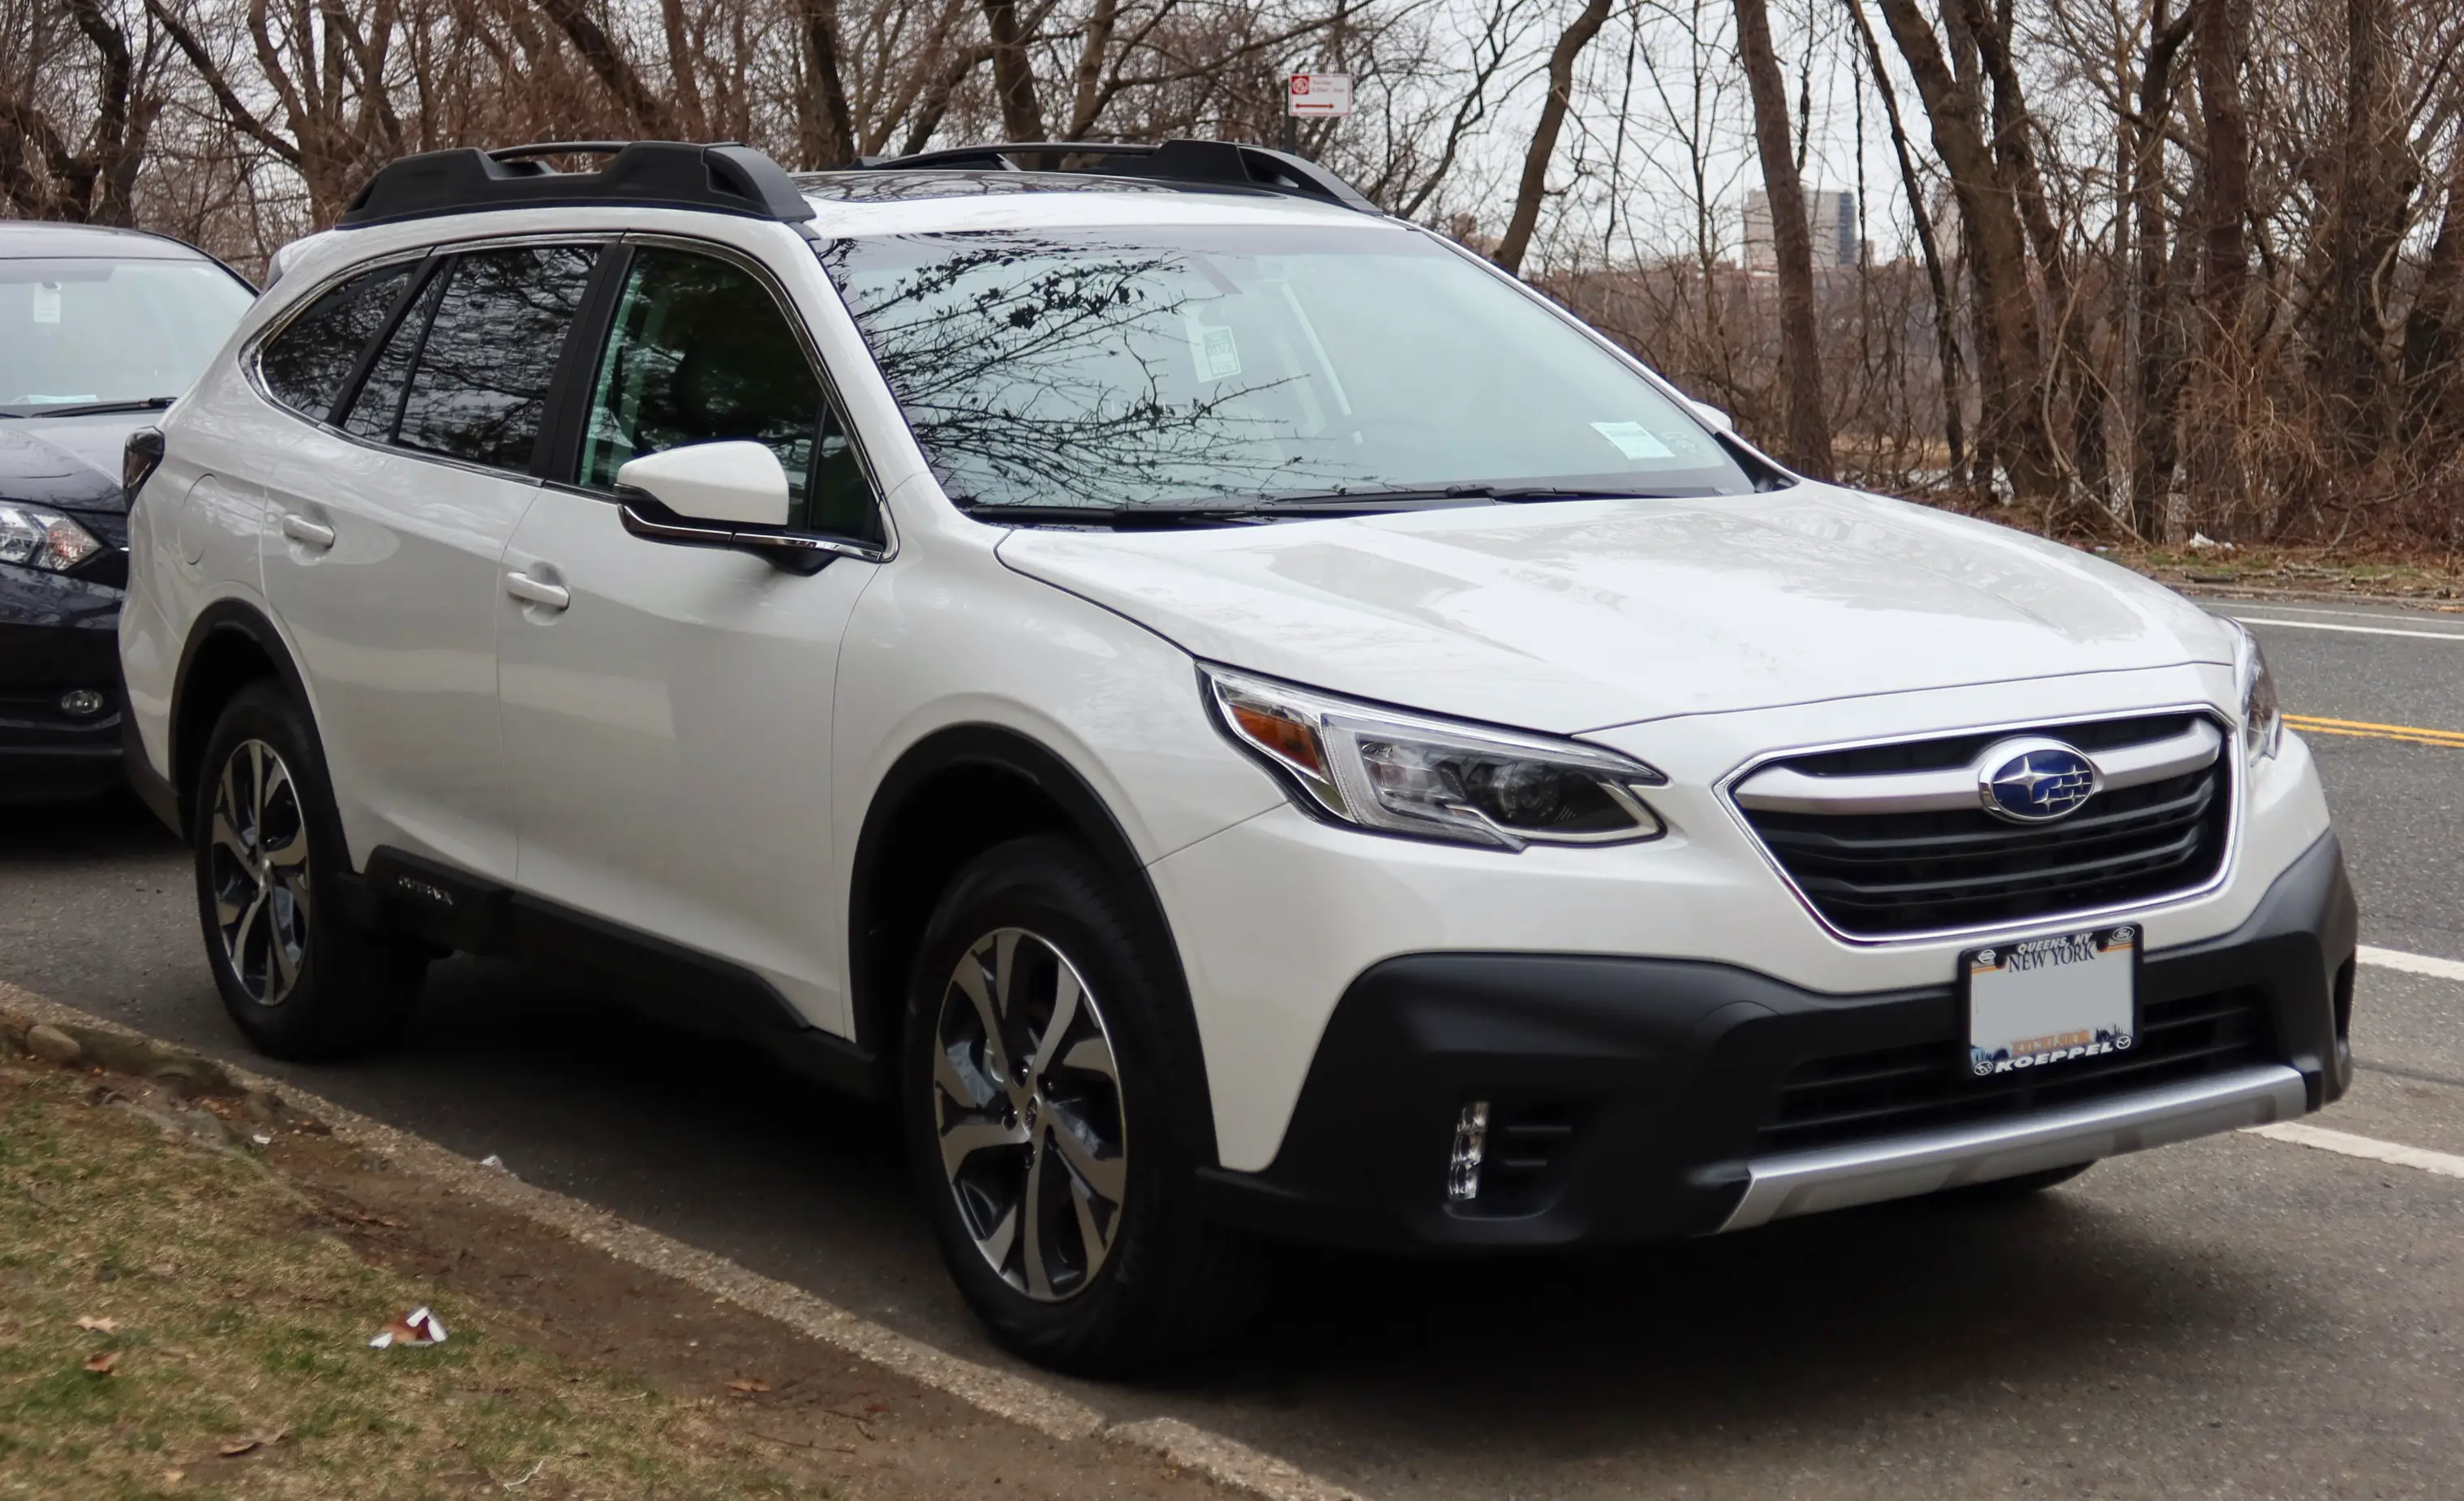 crs-suvs-with-the-most-cargo-room-–-subaru-outback,-ascent-check-that-box-too